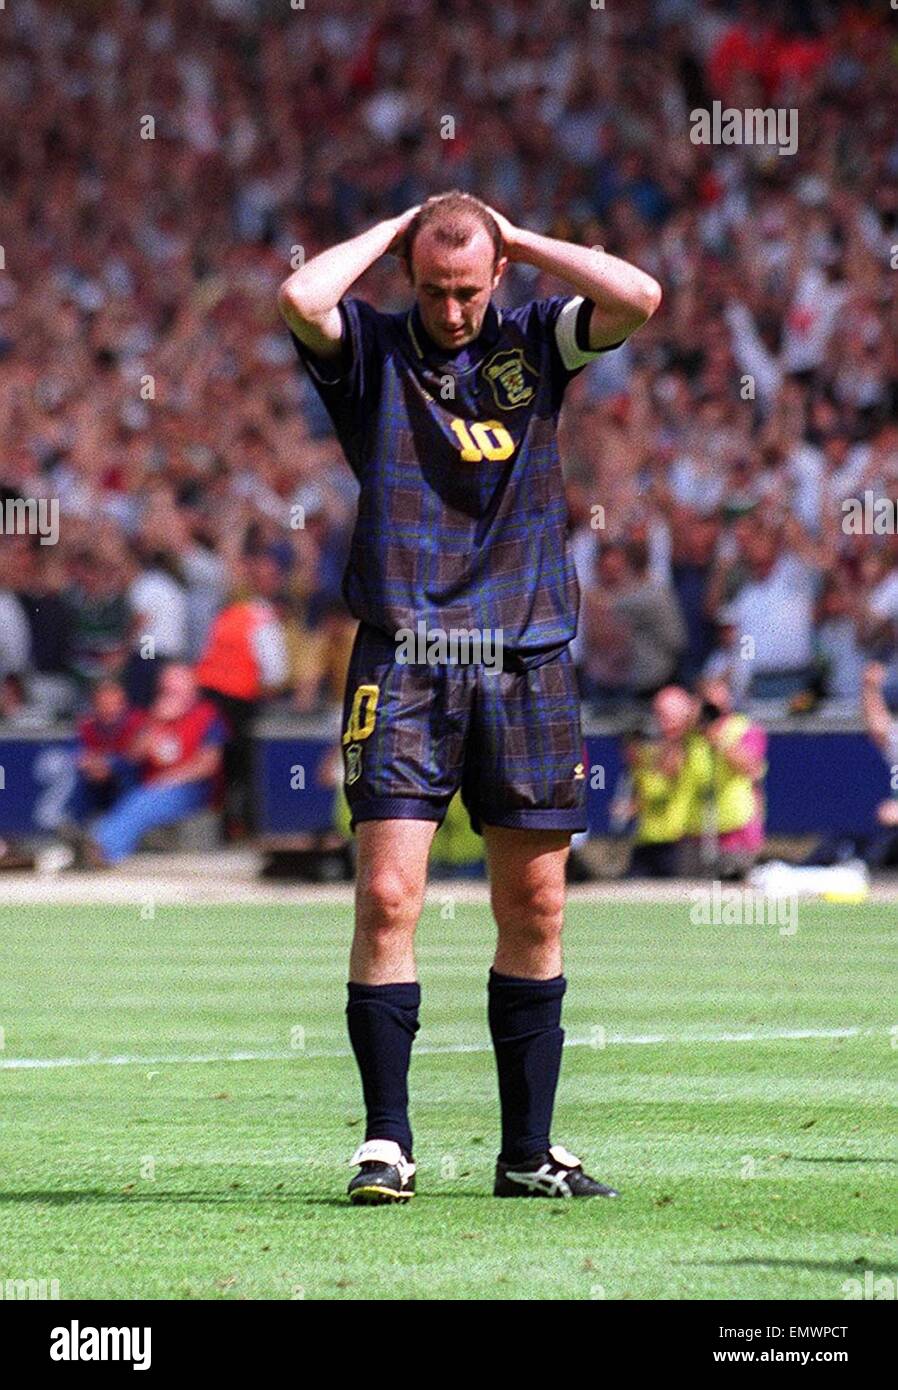 gary-mcallister-misses-the-chance-to-equalise-with-a-penalty-shot-EMWPCT.jpg